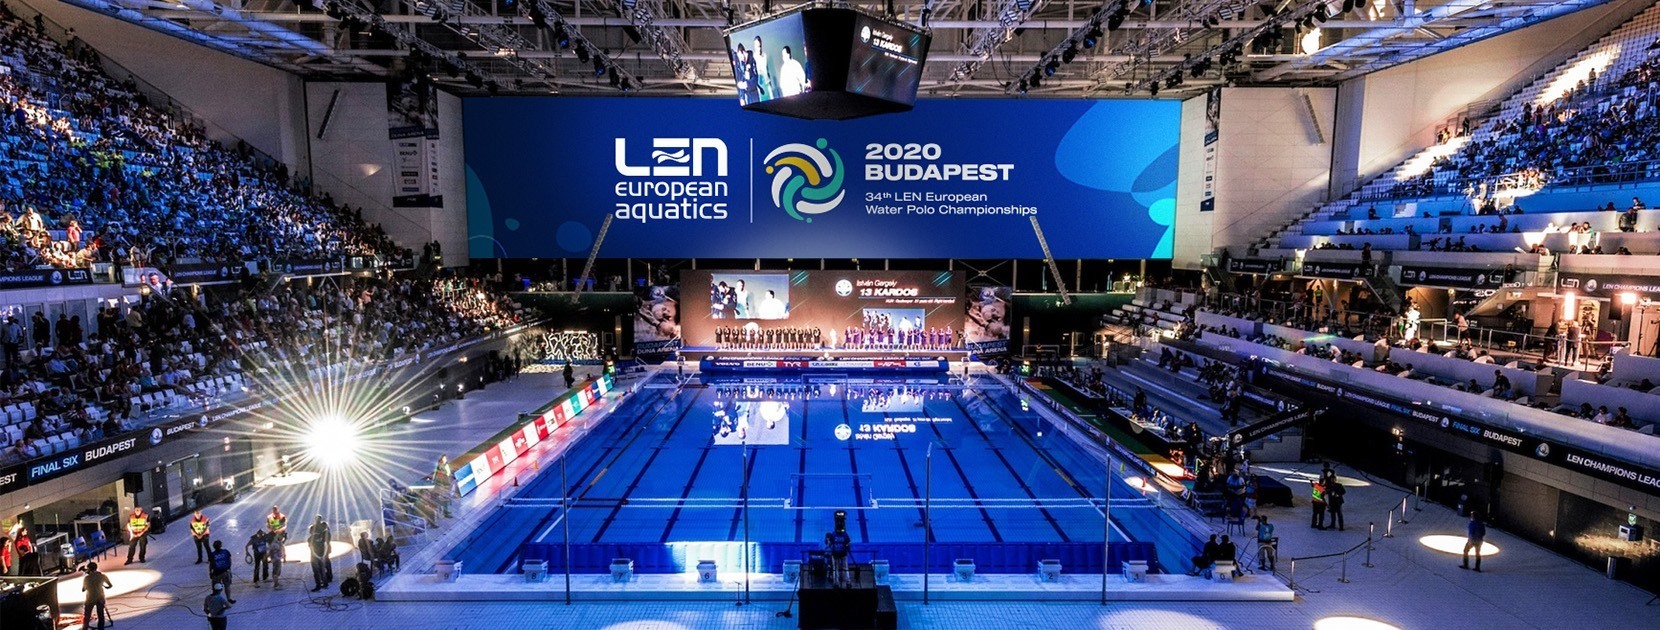 The 34th European Water Polo Championships will end on January 26.